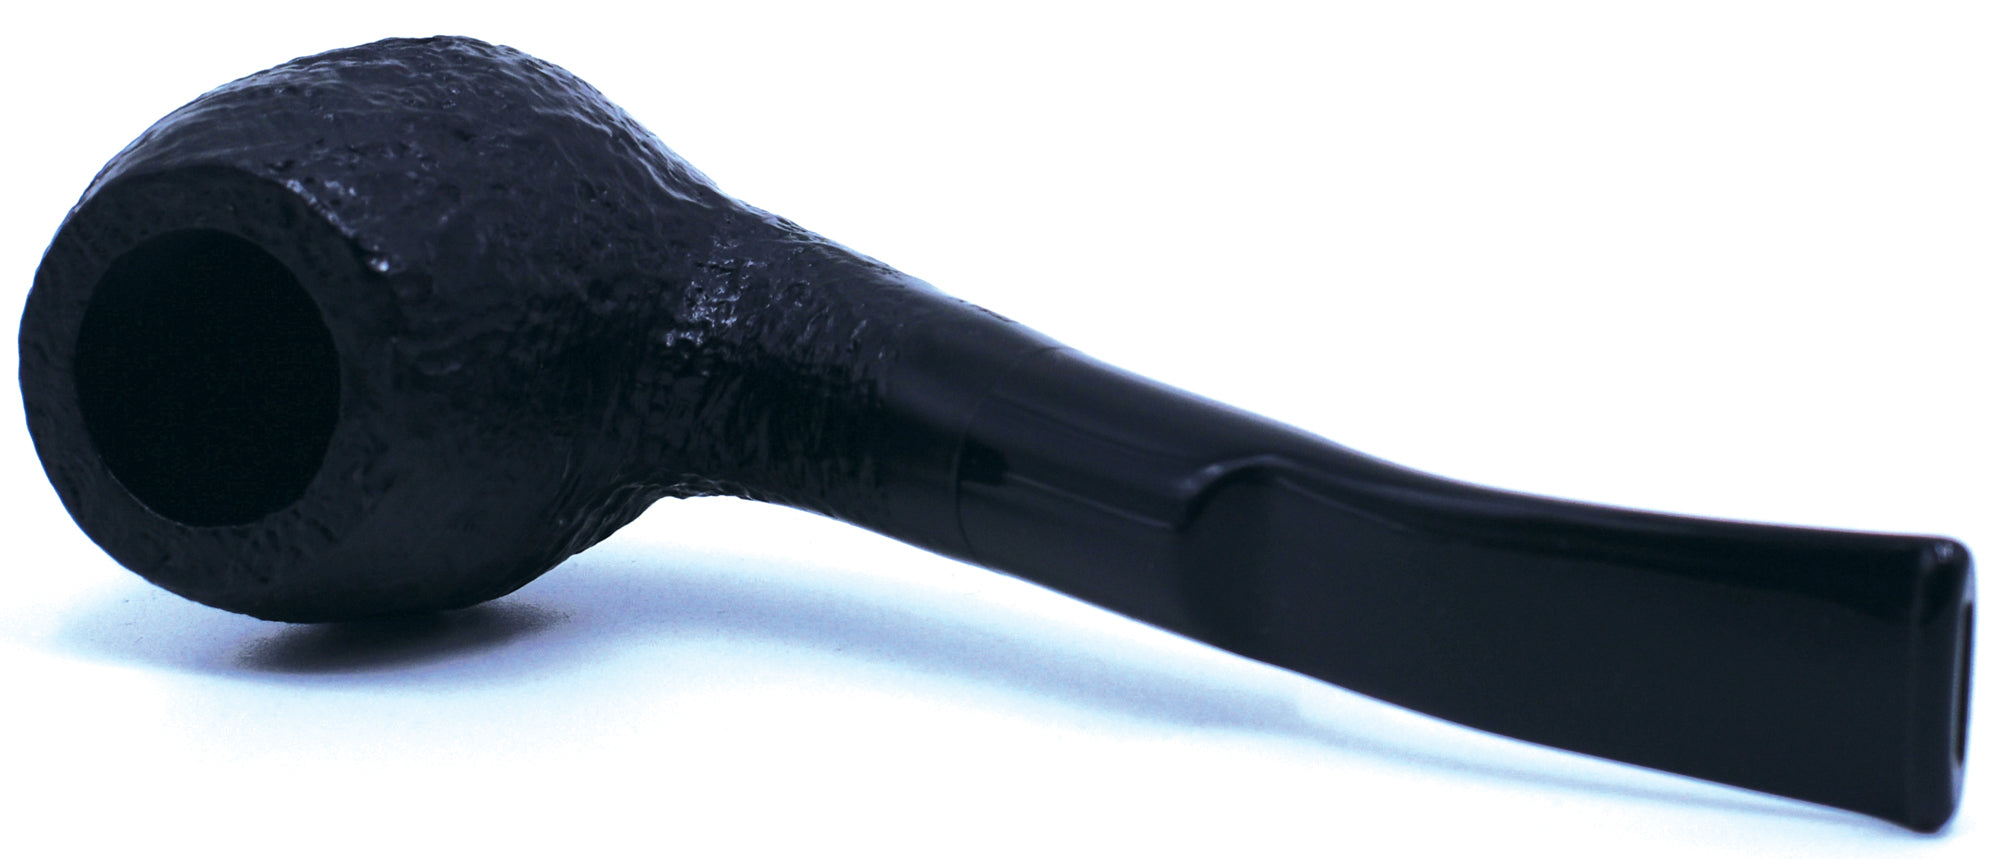 LEGENDEX® PAGANINI* 9 MM Filtered Briar Smoking Pipe Made In Italy 01-08-337